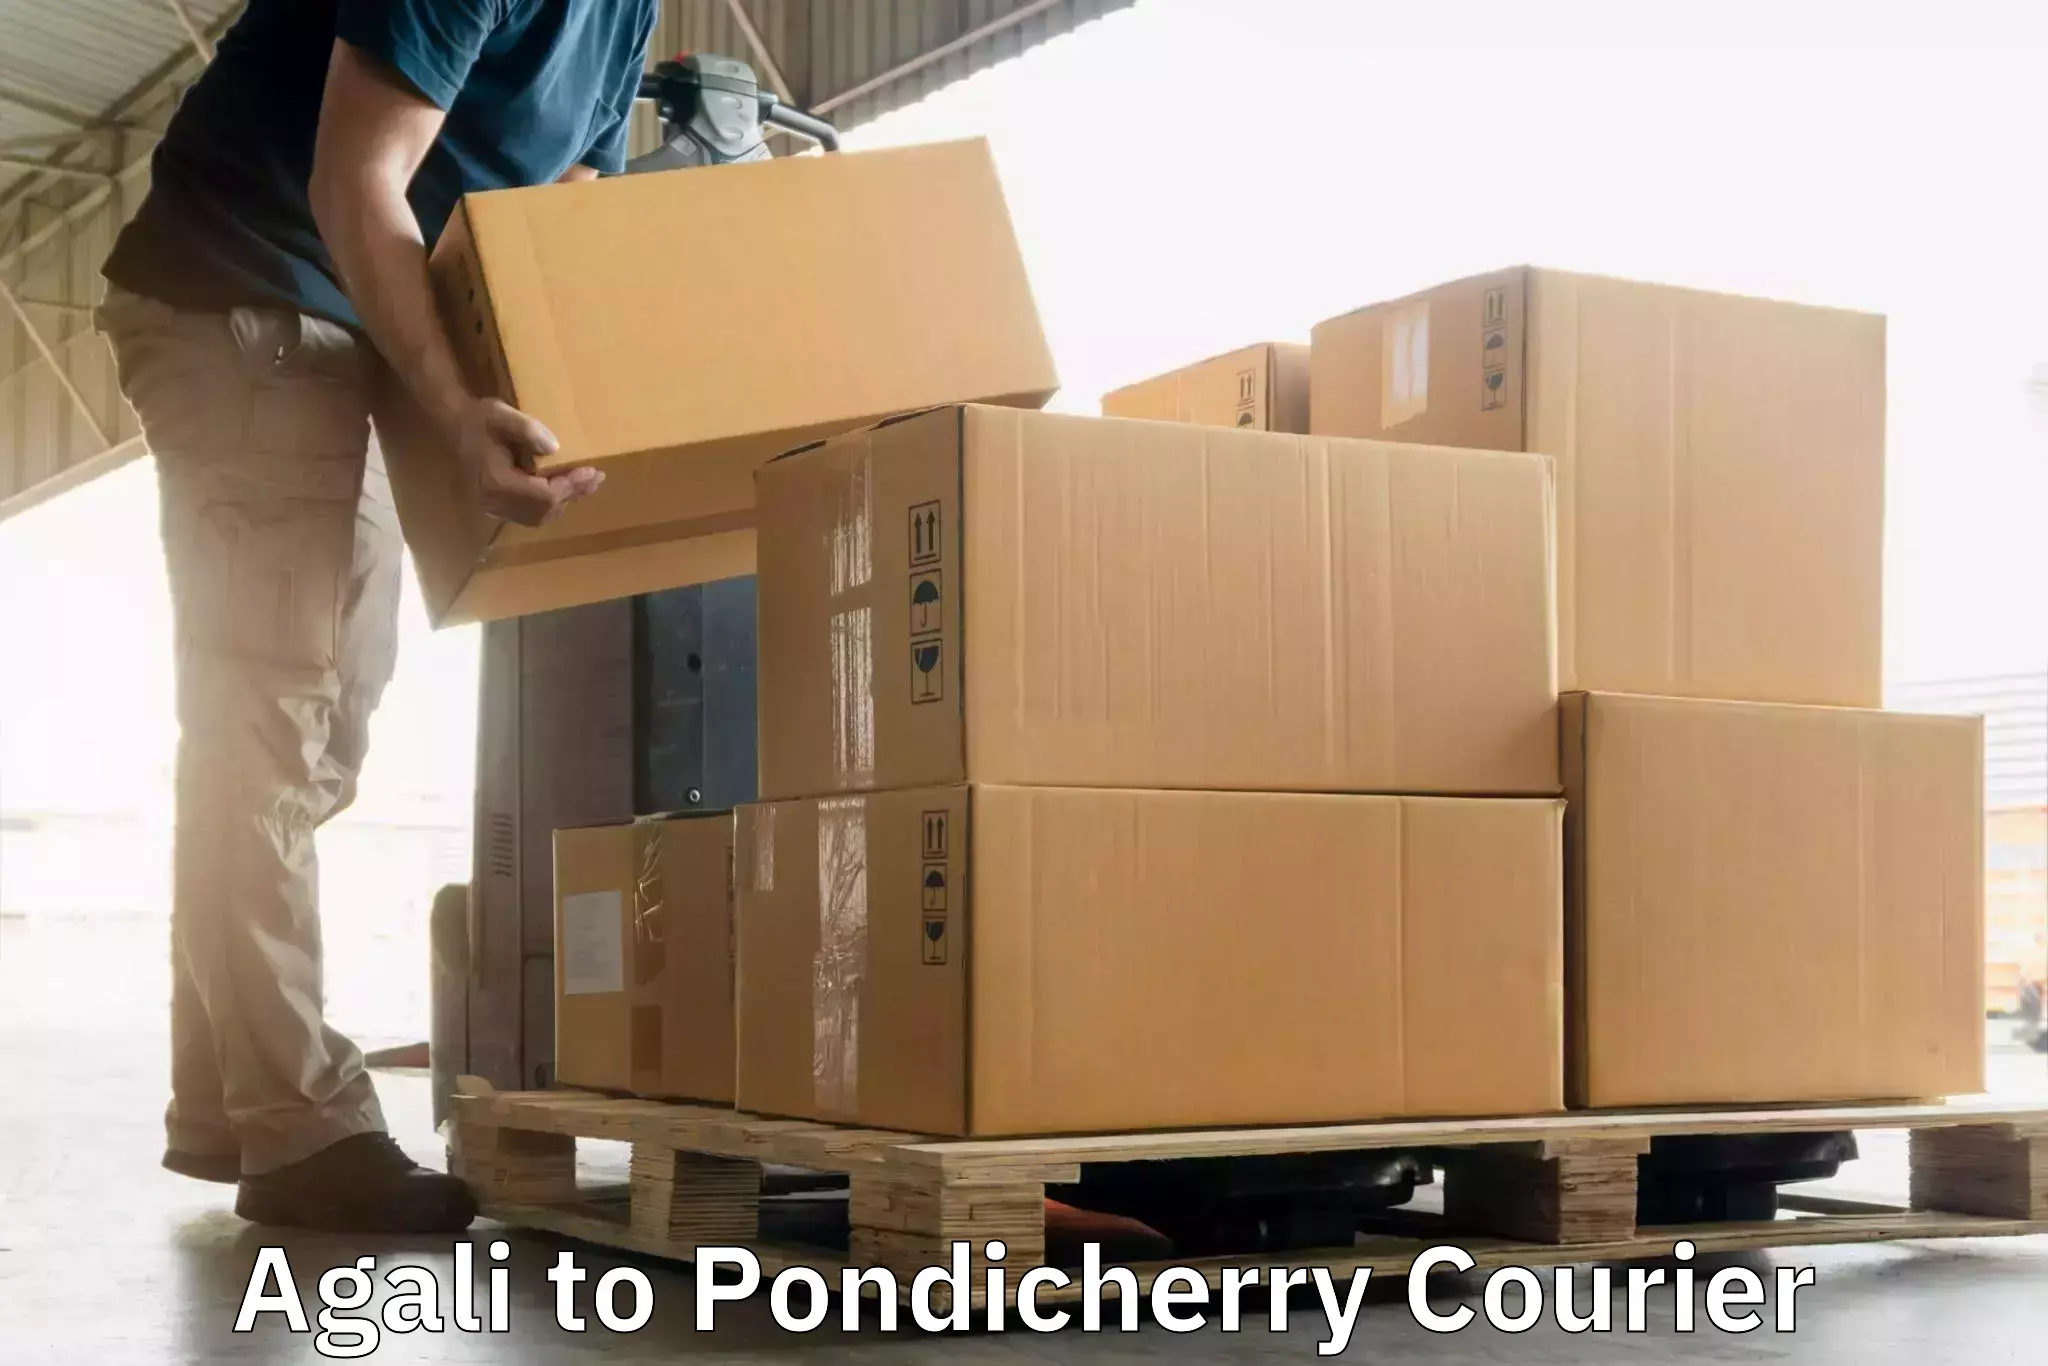 Sustainable shipping practices Agali to Pondicherry